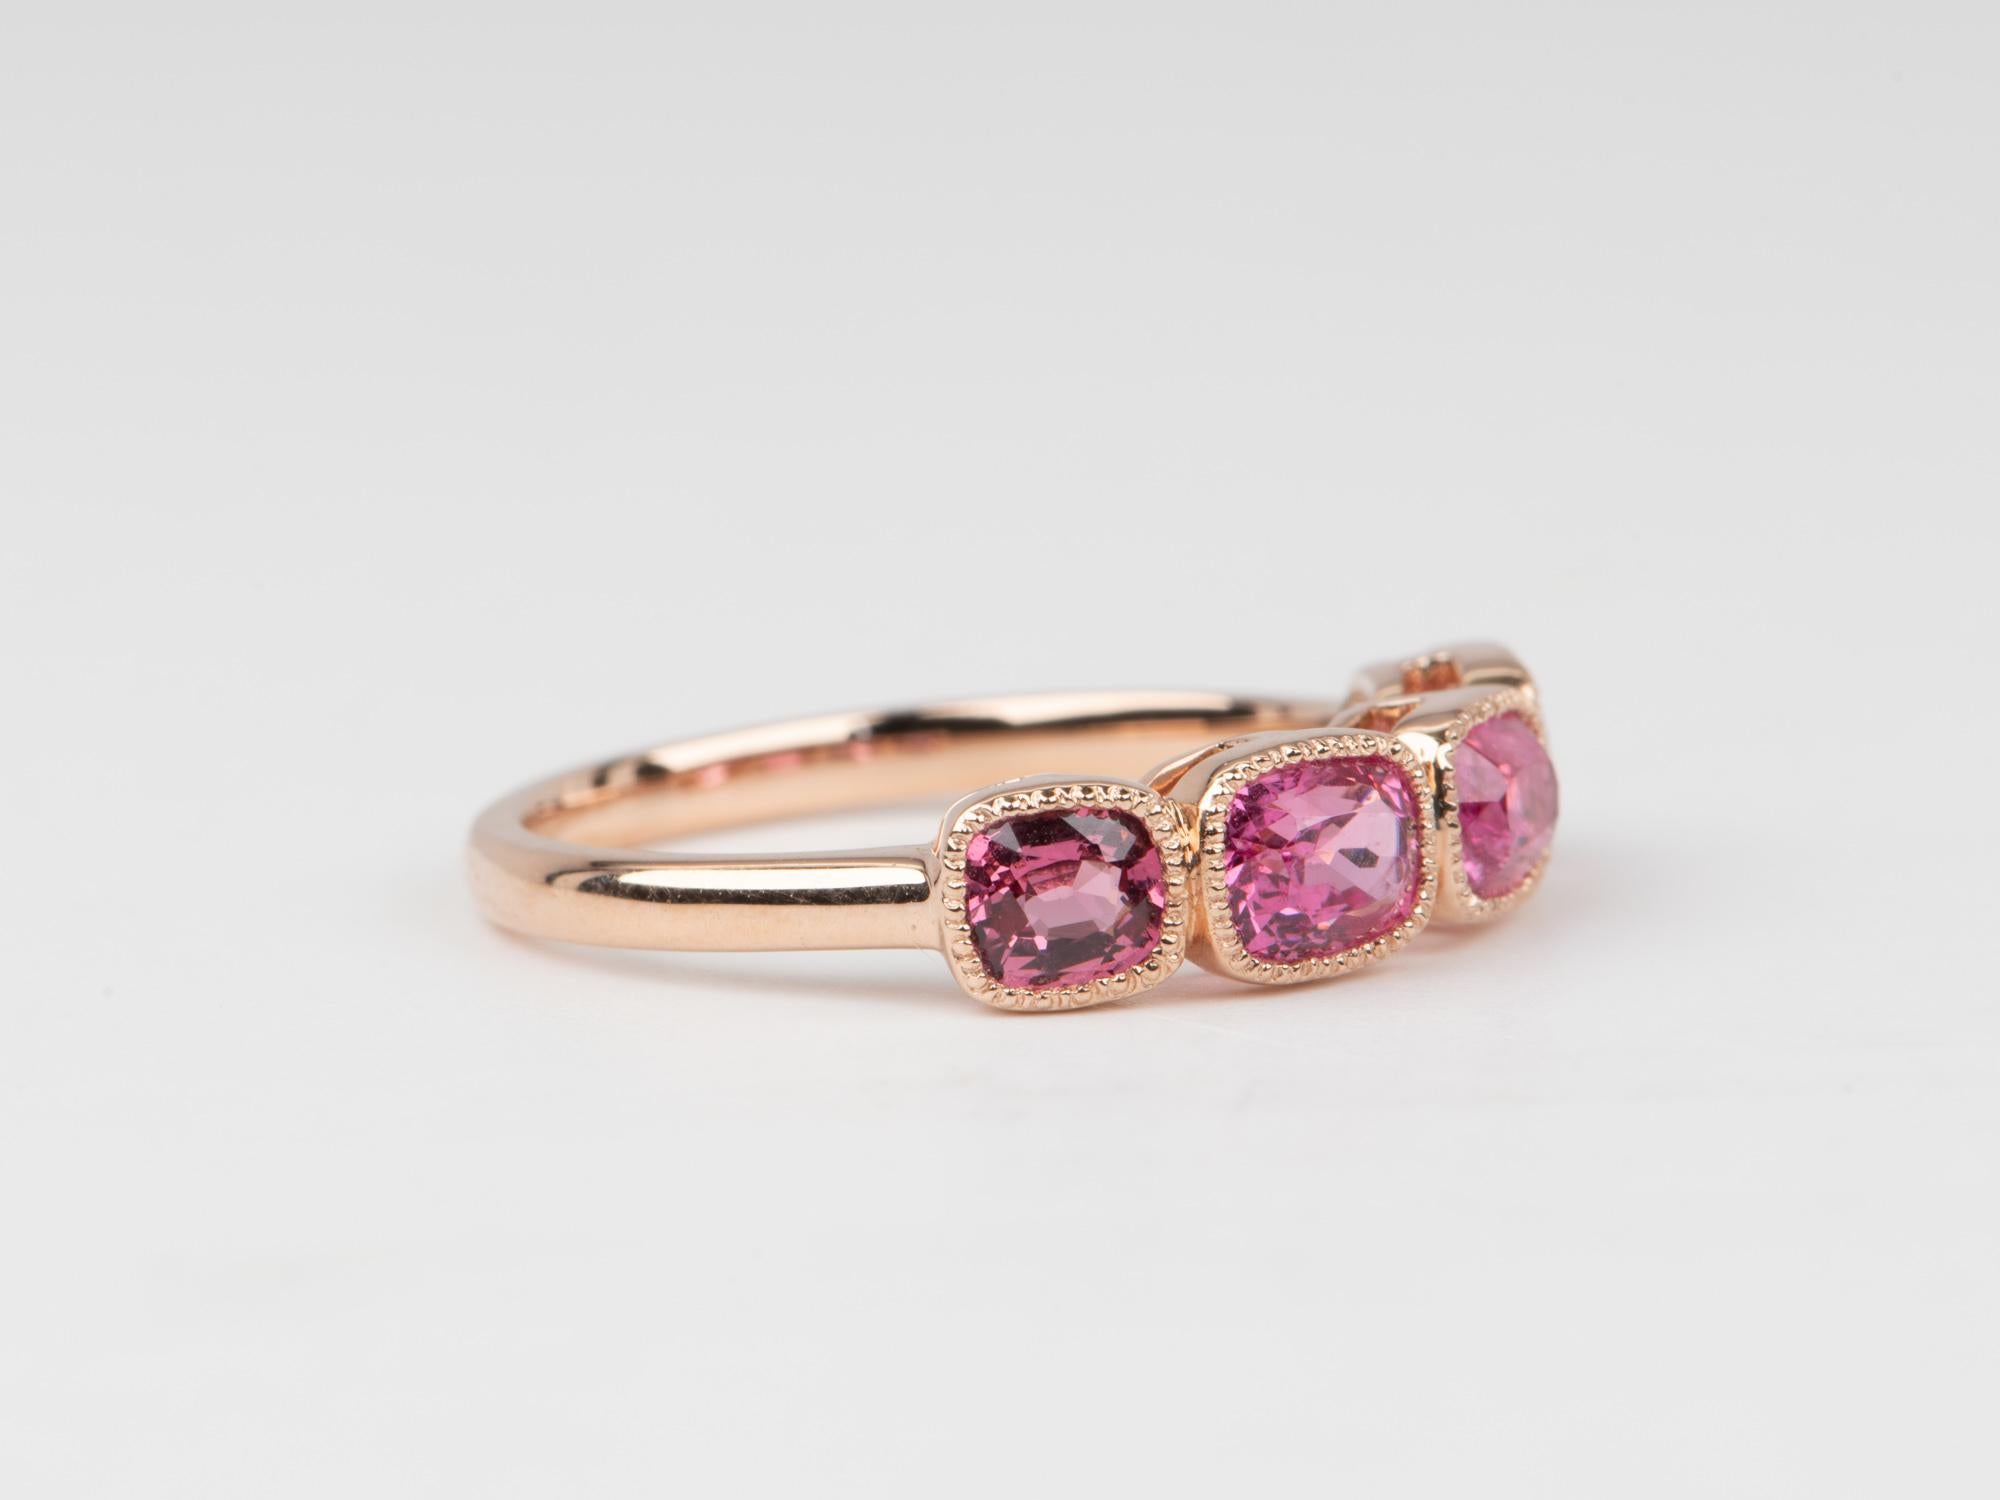 Bright Pink Red Spinel Milgrain Bezel Set Wedding Band 14K Gold In New Condition For Sale In Osprey, FL